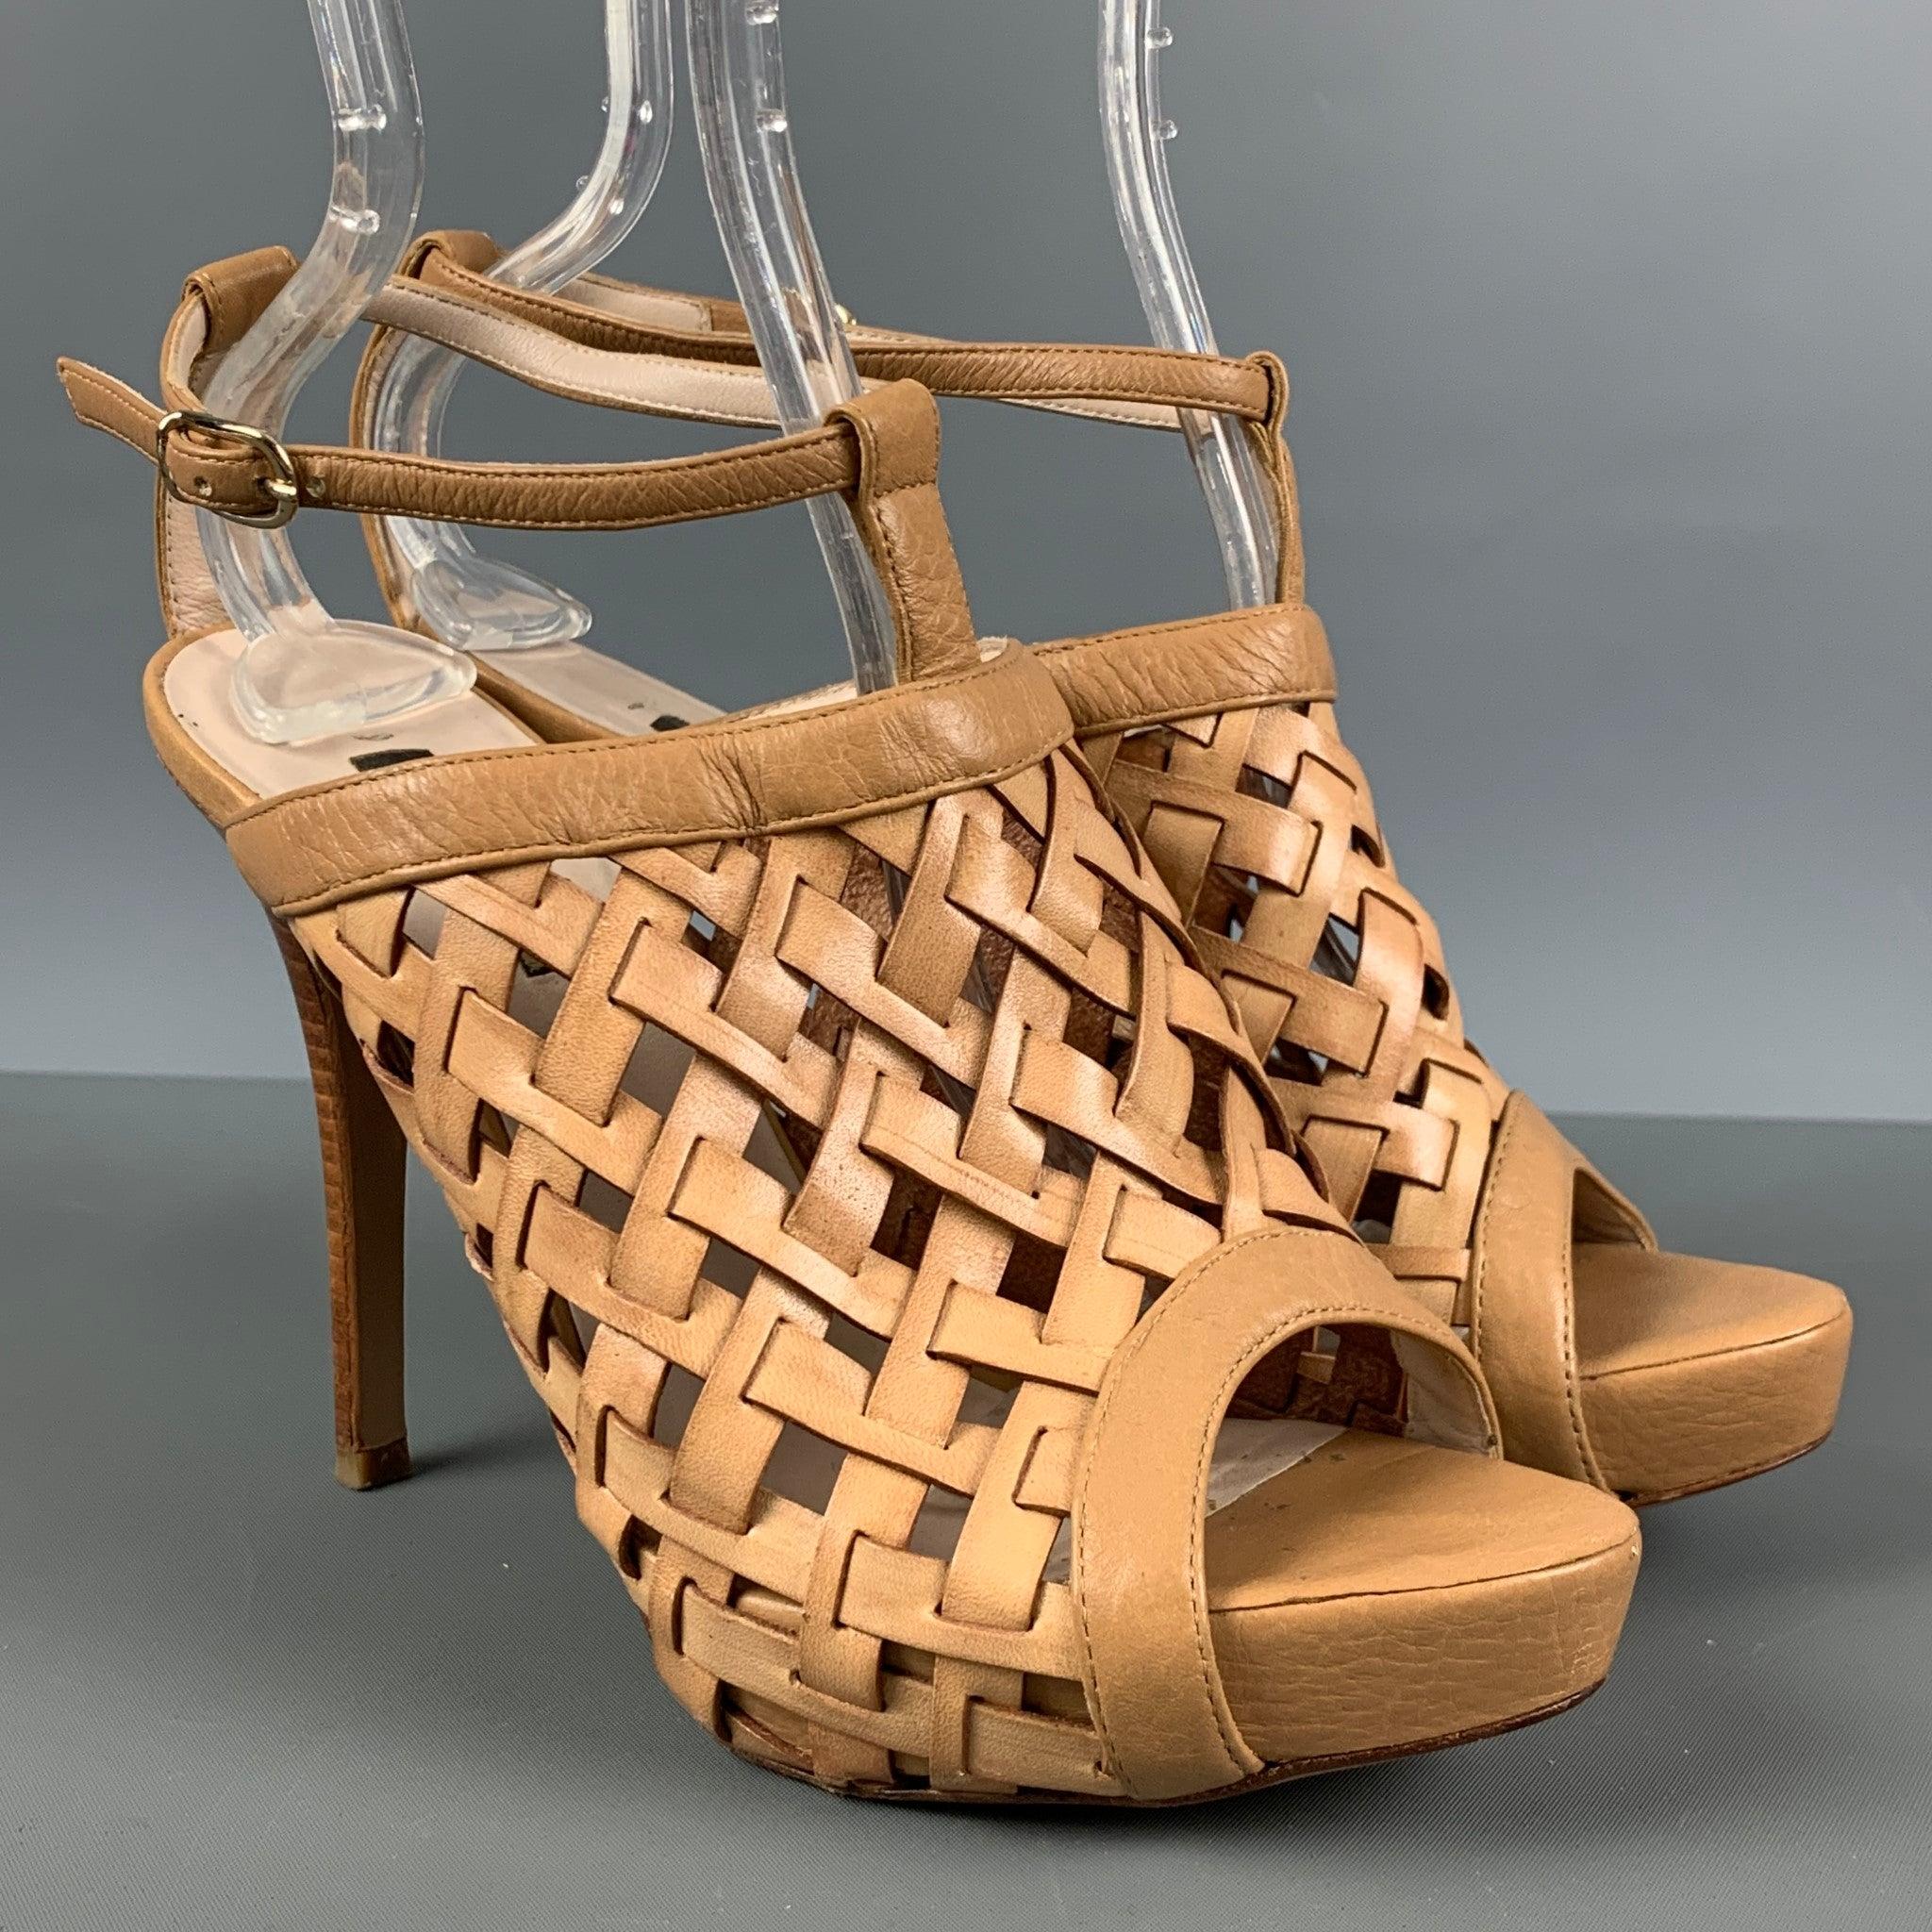 ESCADA sandals come in beige leather featuring a woven leather front, platform style, and an ankle strap. Made in Italy.Very Good Pre-Owned Condition. 

Marked:   IT 38Heel: 4.5 inches Platform: 1 inches 
  
  
 
Reference: 124572
Category: